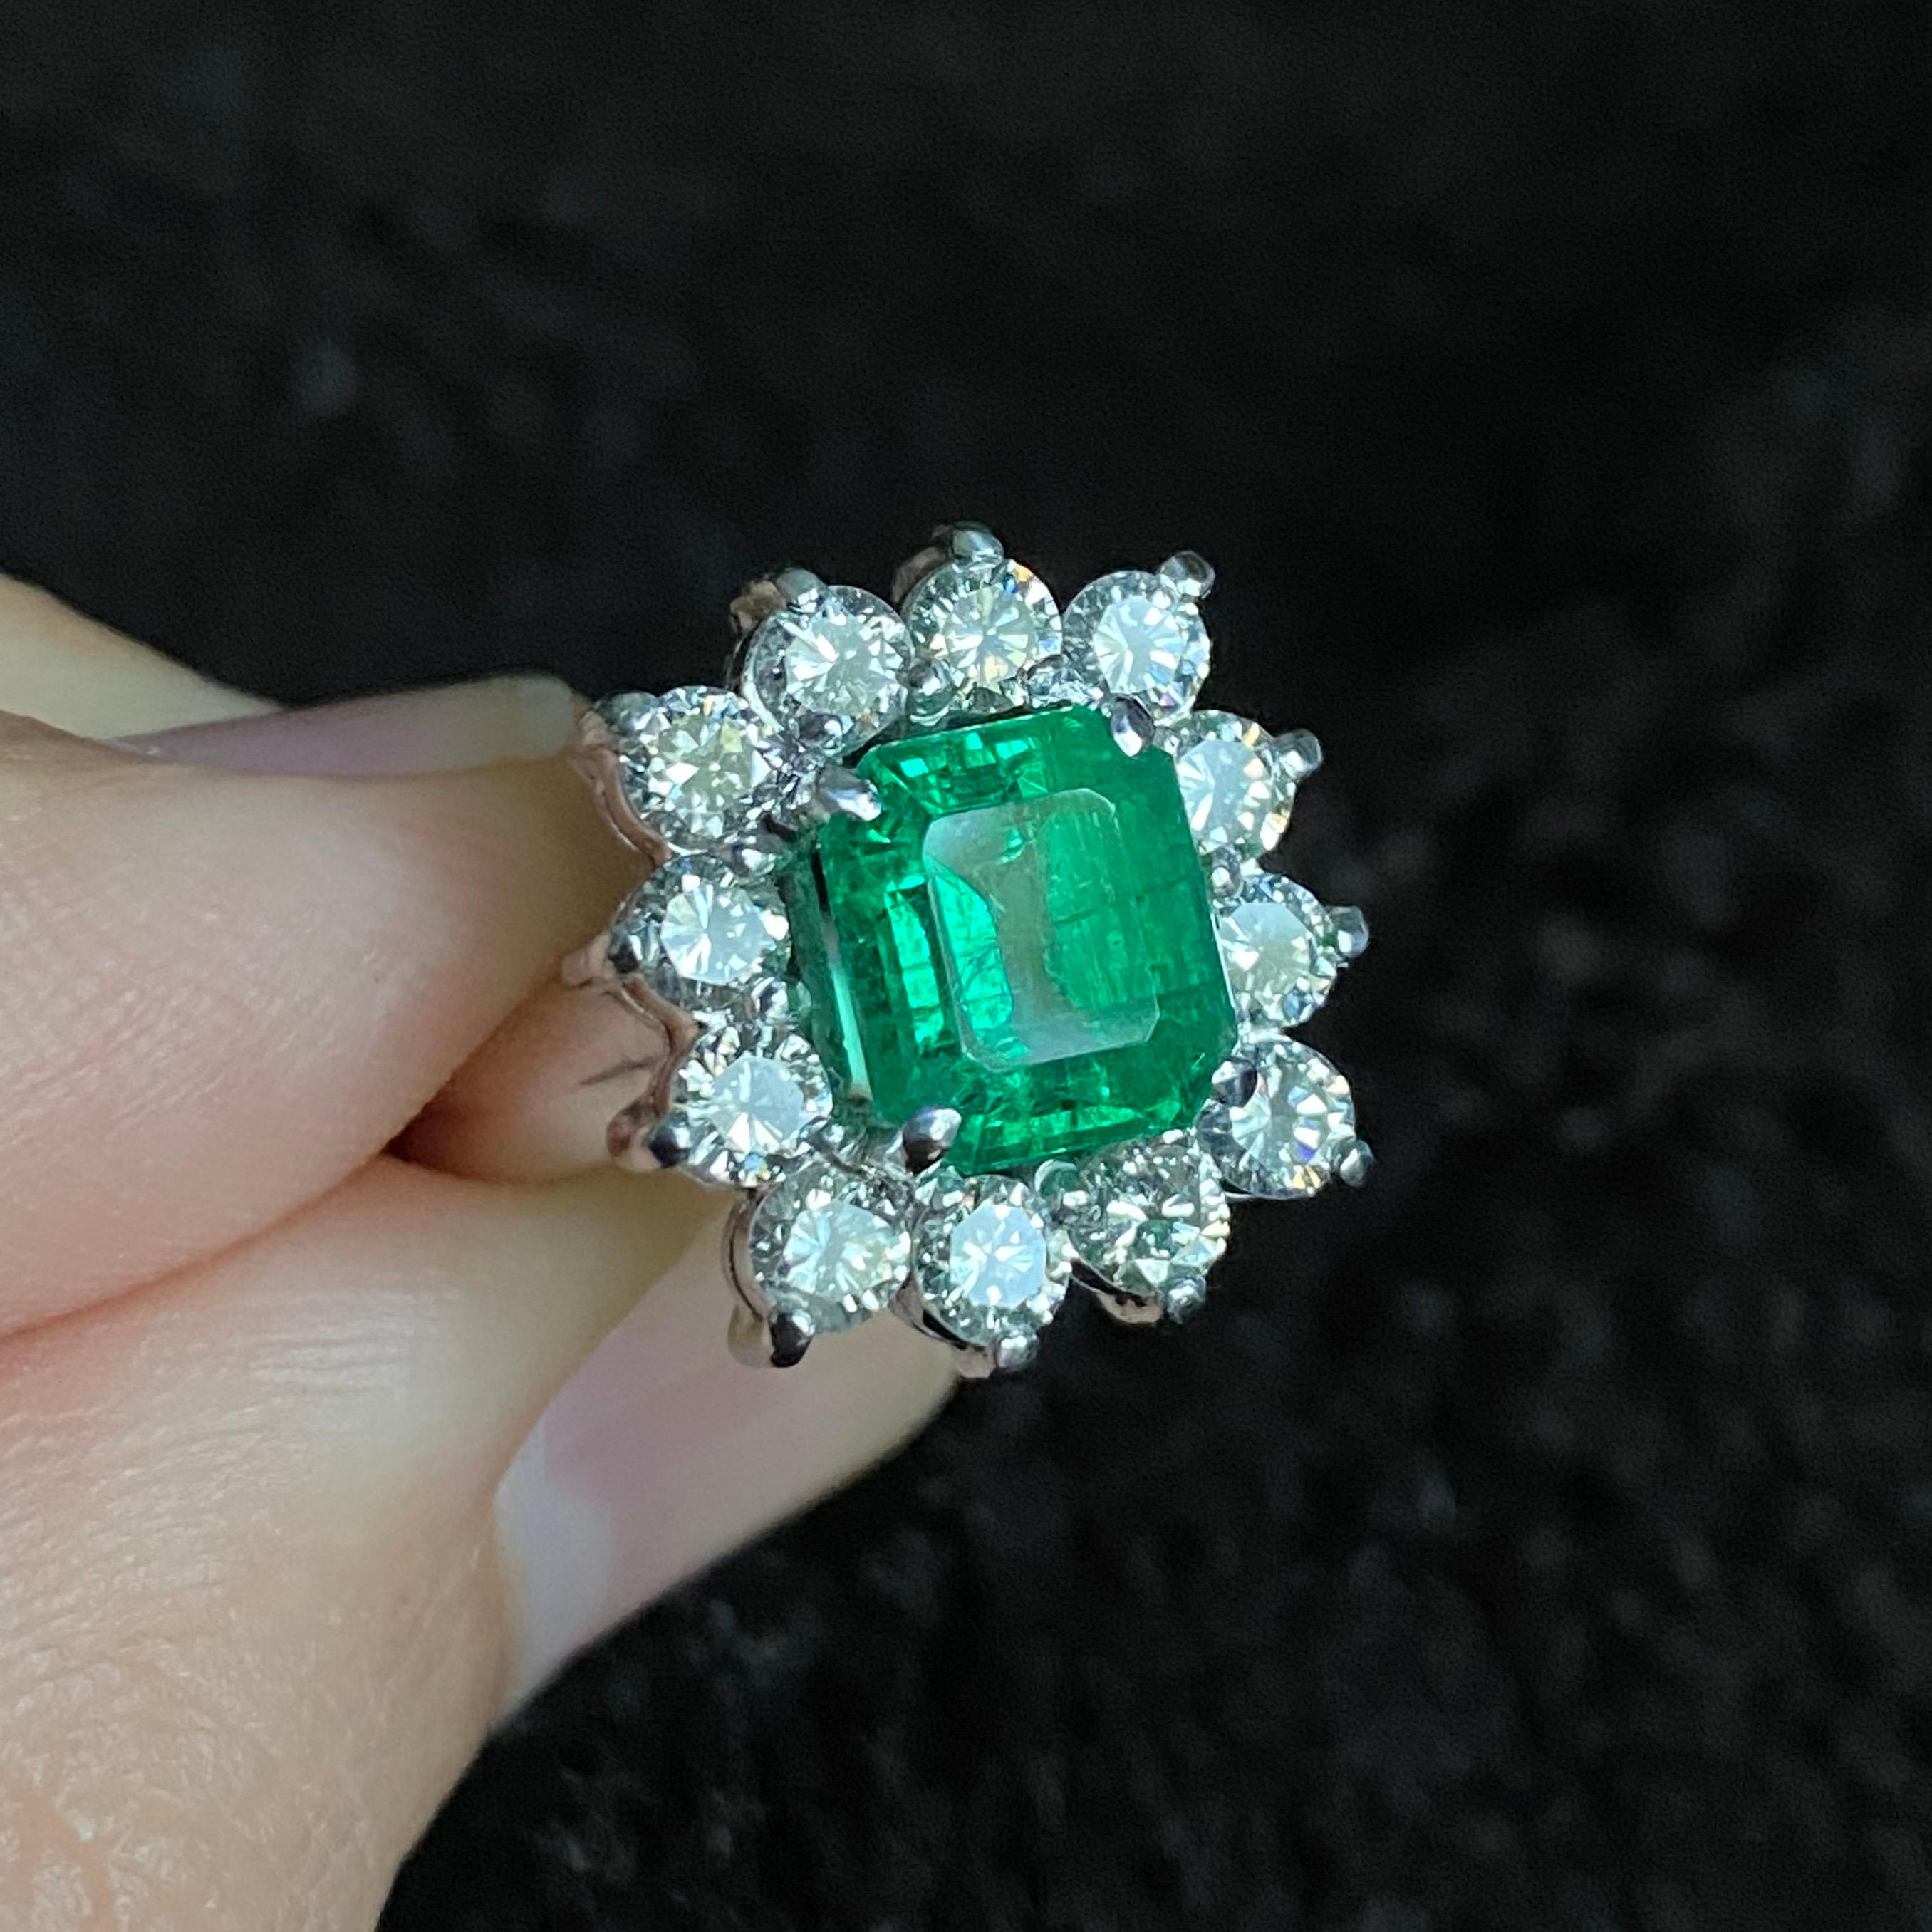 Contemporary Emerald Diamond Coronet Cluster Engagement Ring White Gold, 2010s 9